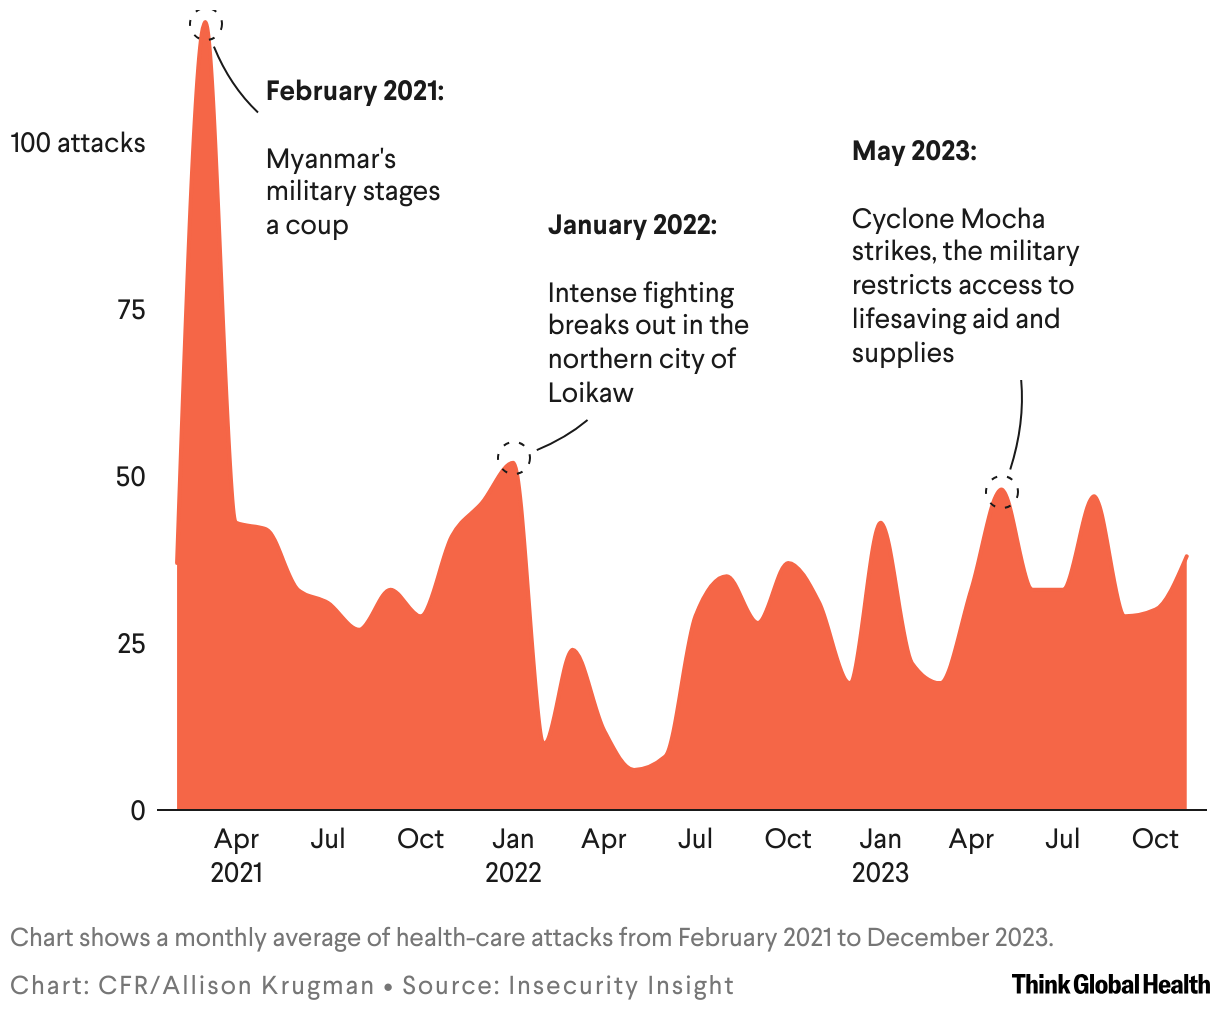 Chart shows a monthly average of health care attacks from February 2021 to December 2023.